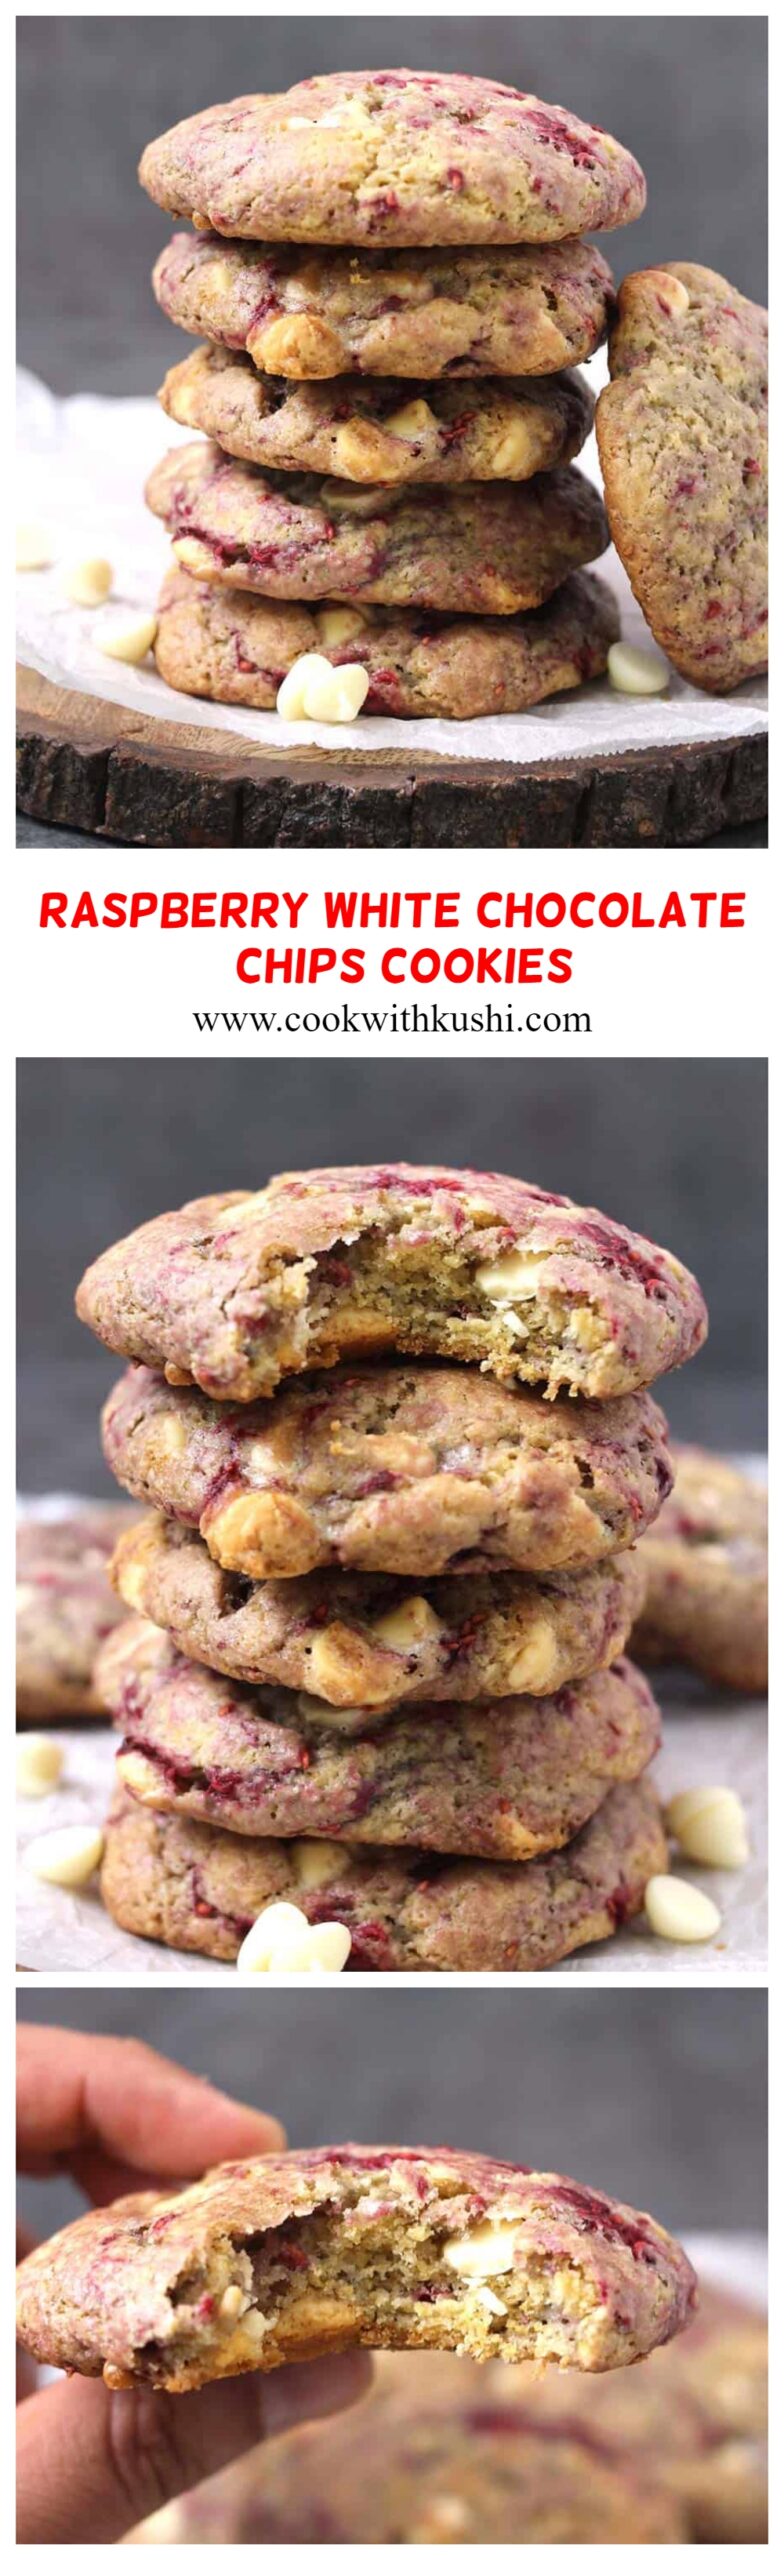 Raspberry White Chocolate Chip Cookies are one of the best, chewy and decadent cookies you will ever try. Do surprise your loved ones with these cookies this holiday season #raspberries #cookies #whitechocolatechipscookies #thanksgving #christmas #halloween #kidsfriendly